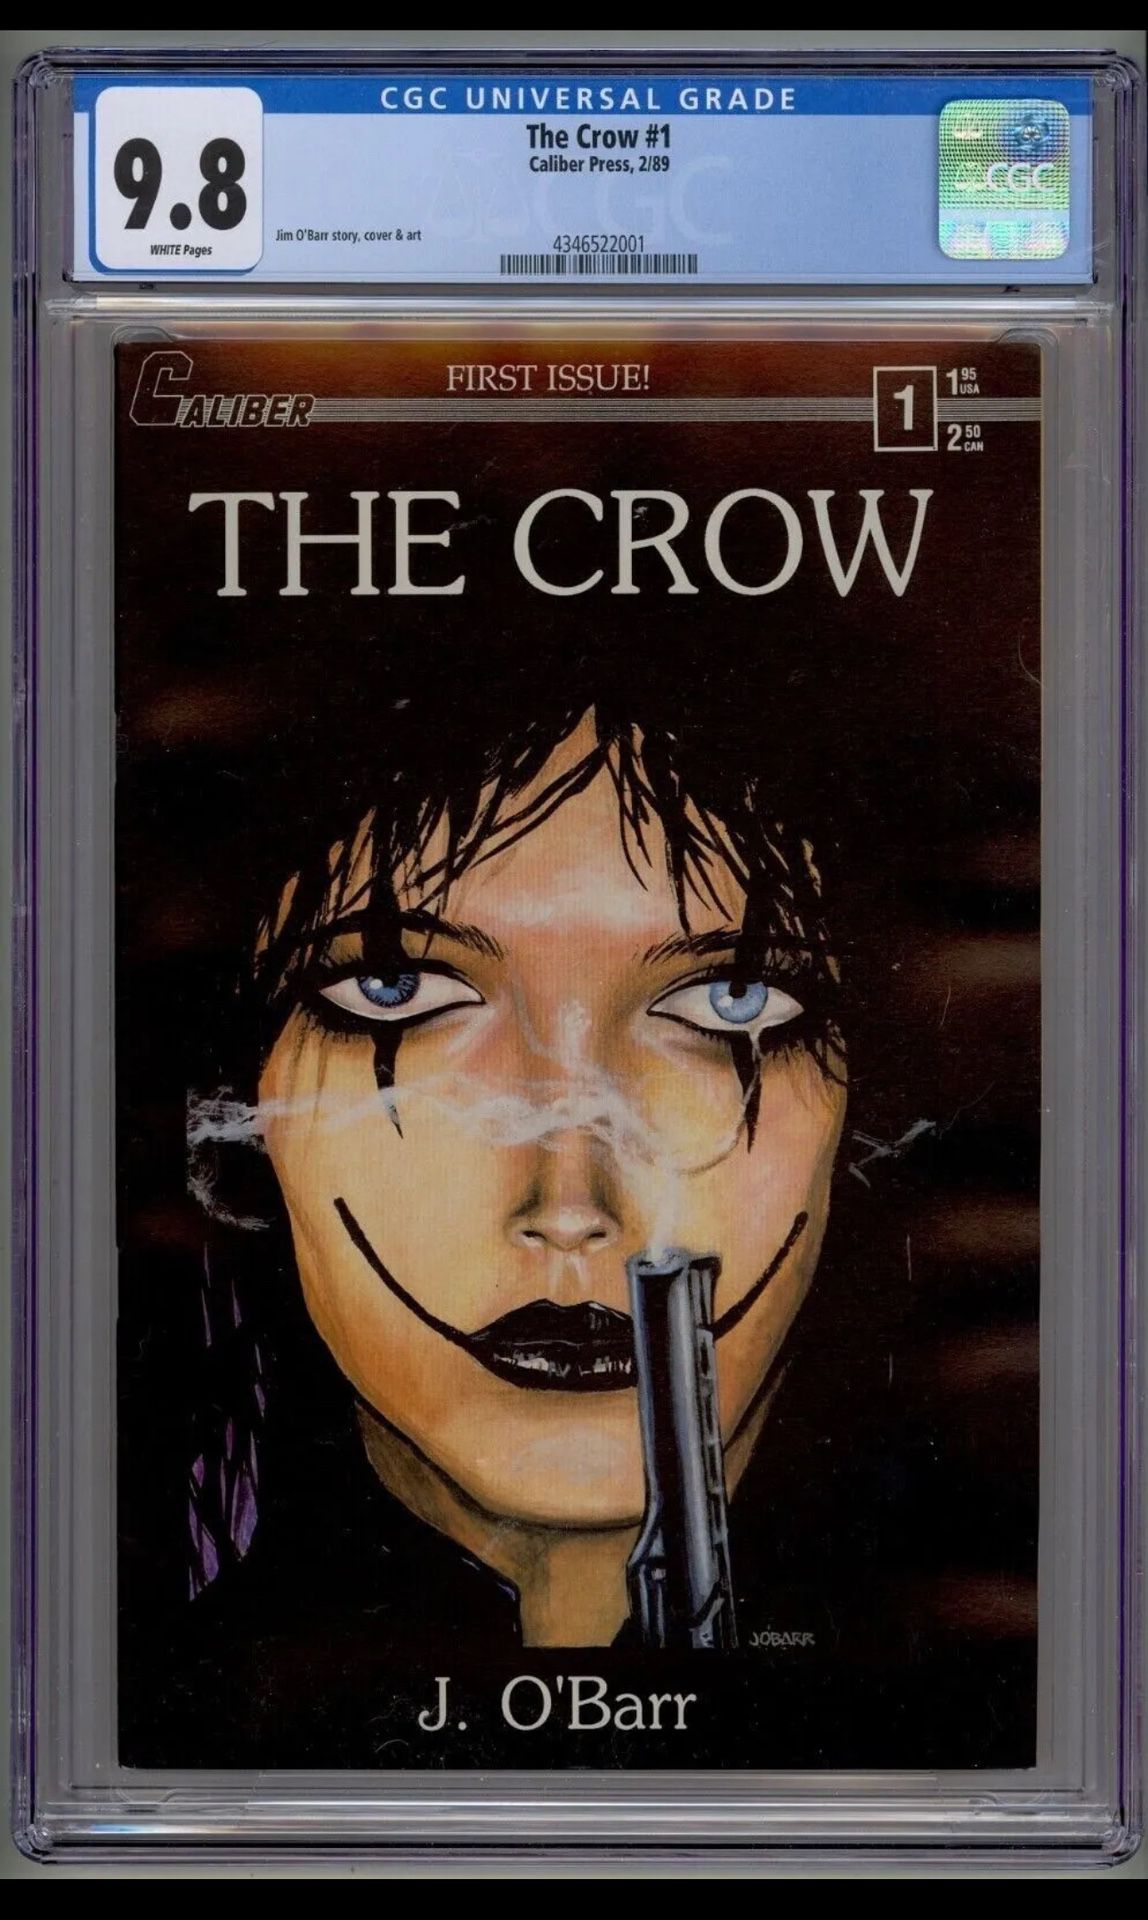 The Crow #1 - CGC 9.8 White Pages - 1st Print 1989 Caliber Press.